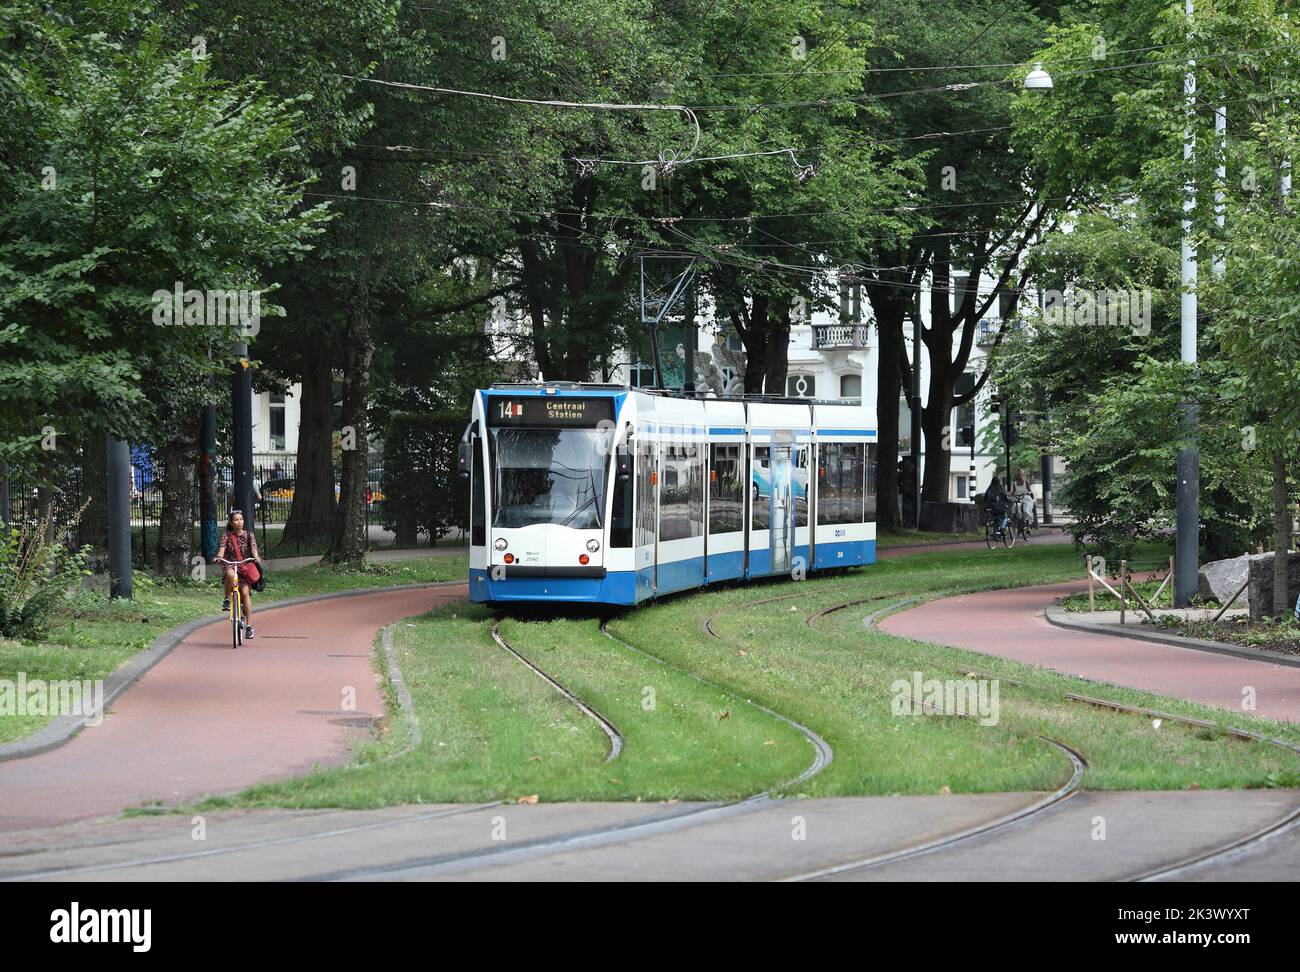 A tram on Plantage Middenlaan, Amsterdam.  A street for sustainable transport: tram lines flanked by cycle lanes, and footpaths for pedestrians. Stock Photo